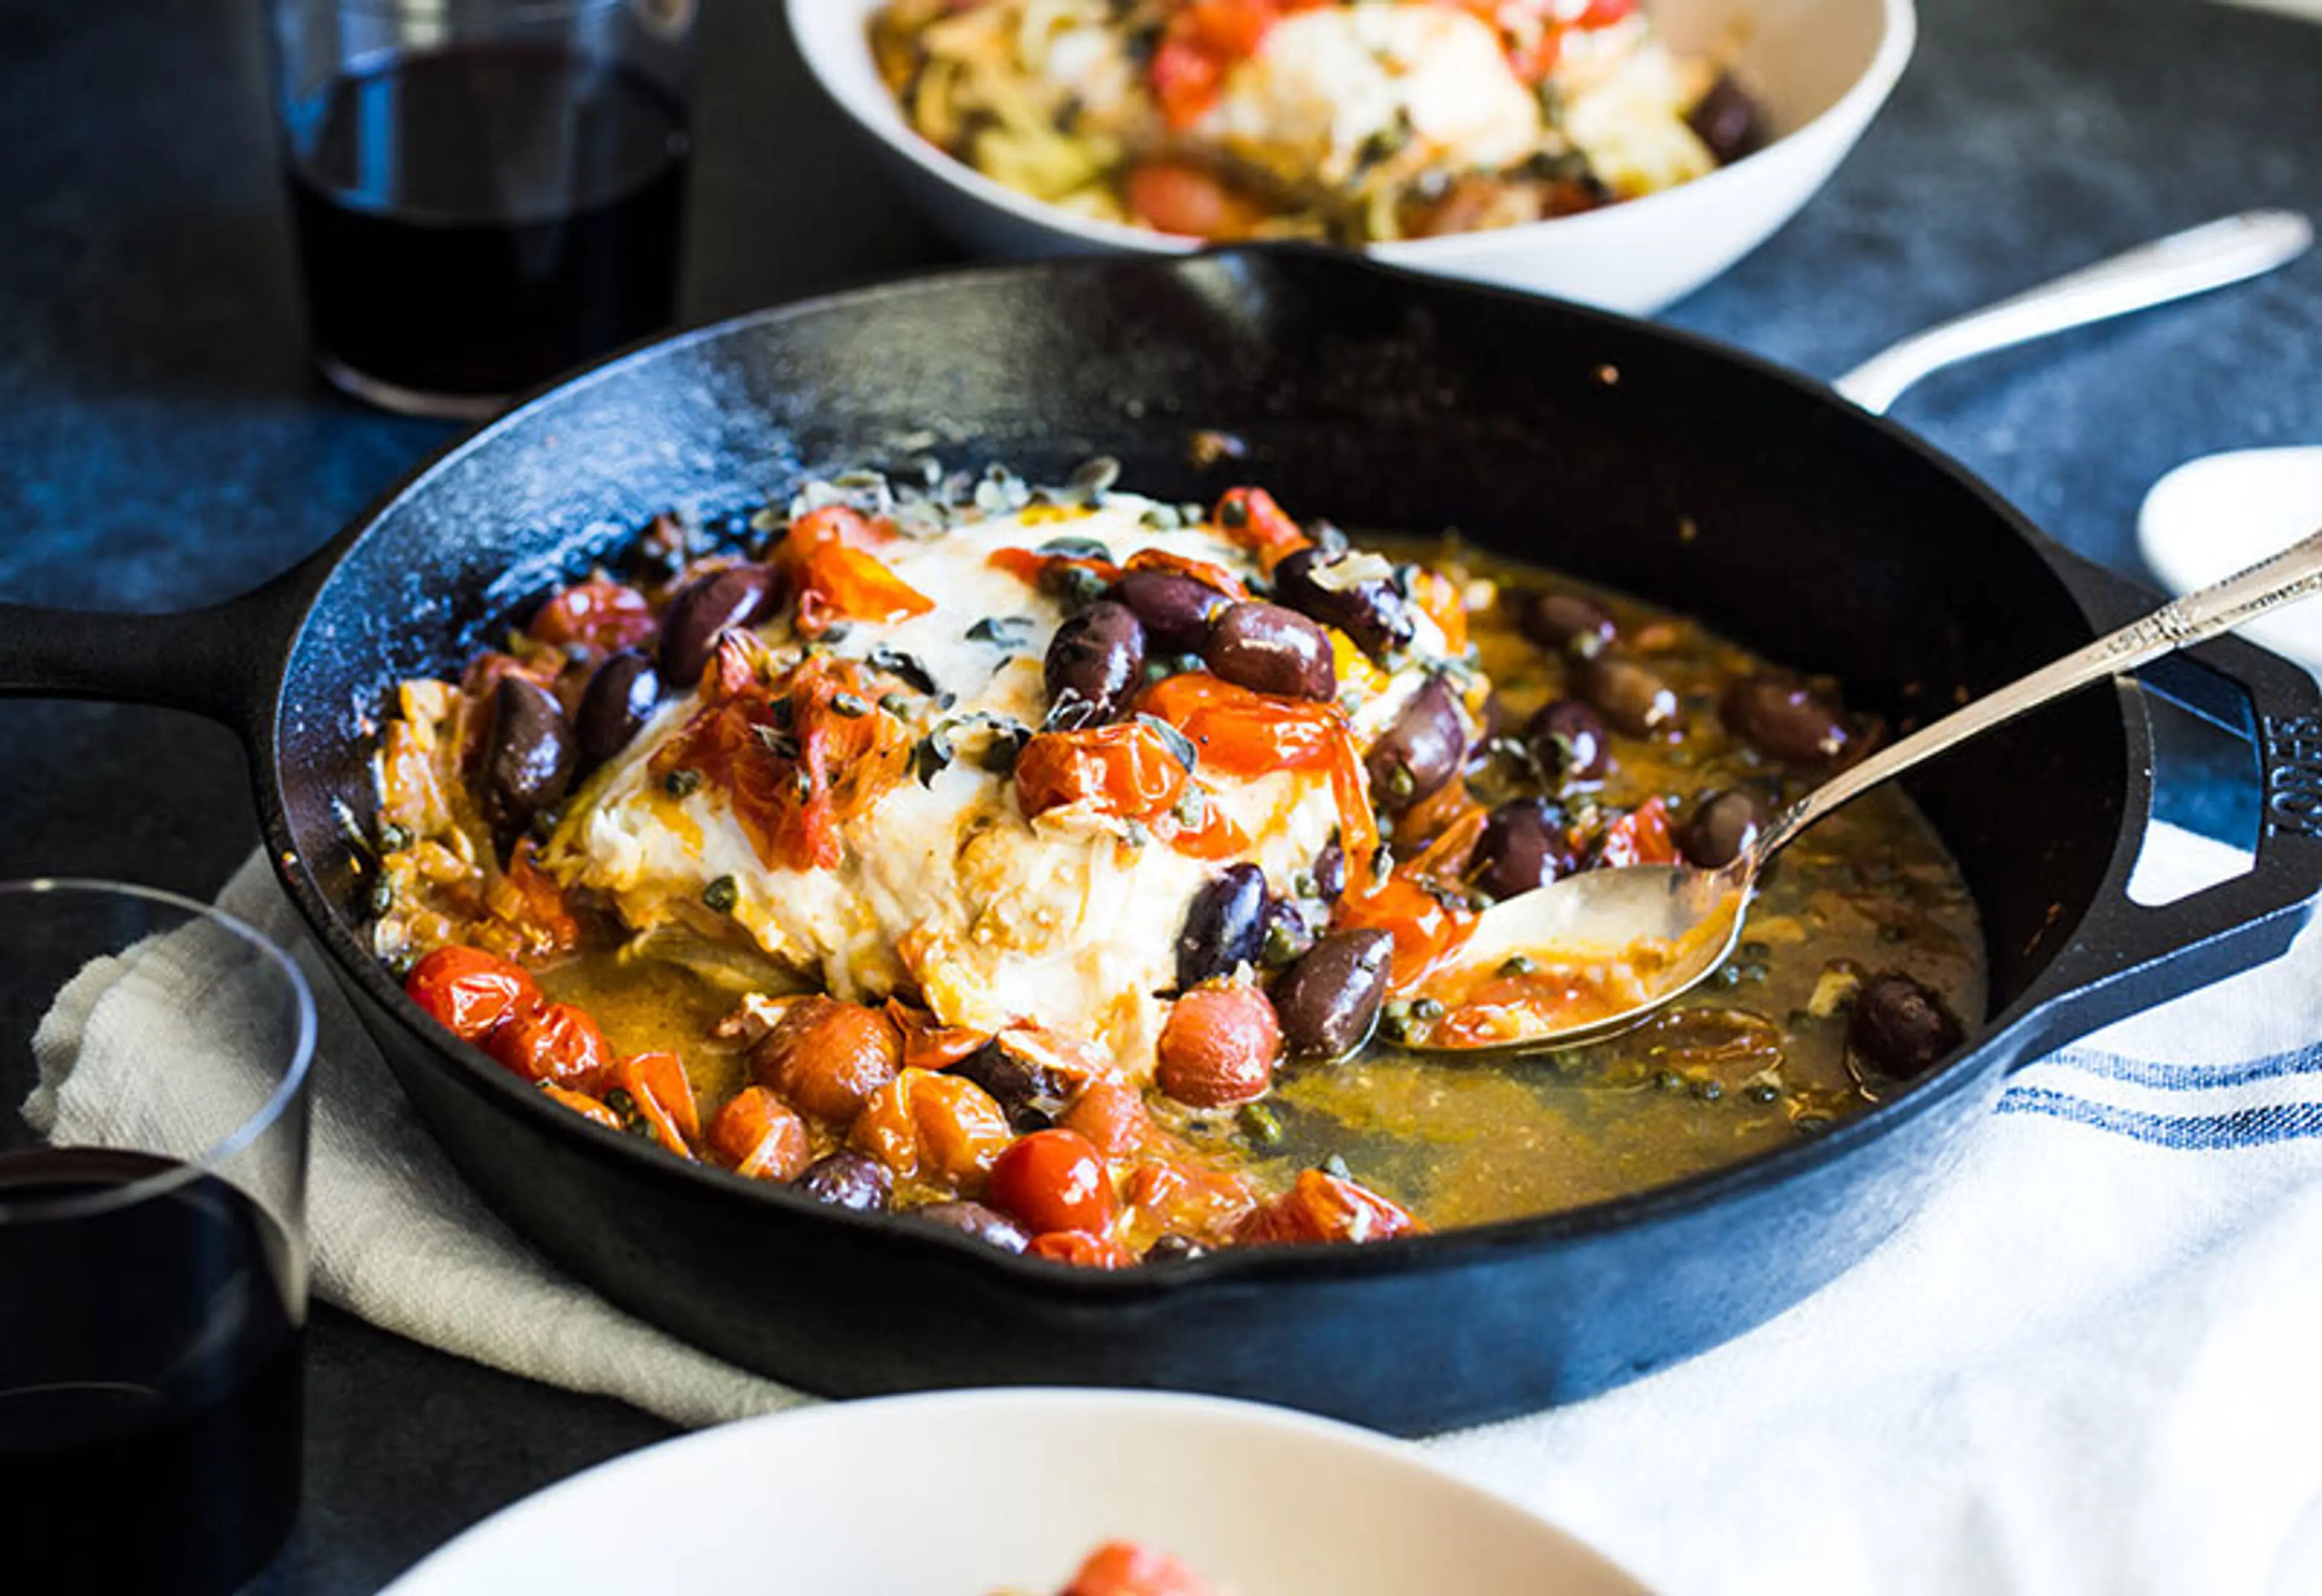 Baked Halibut with White Wine, Olives, Capers and Tomatoes